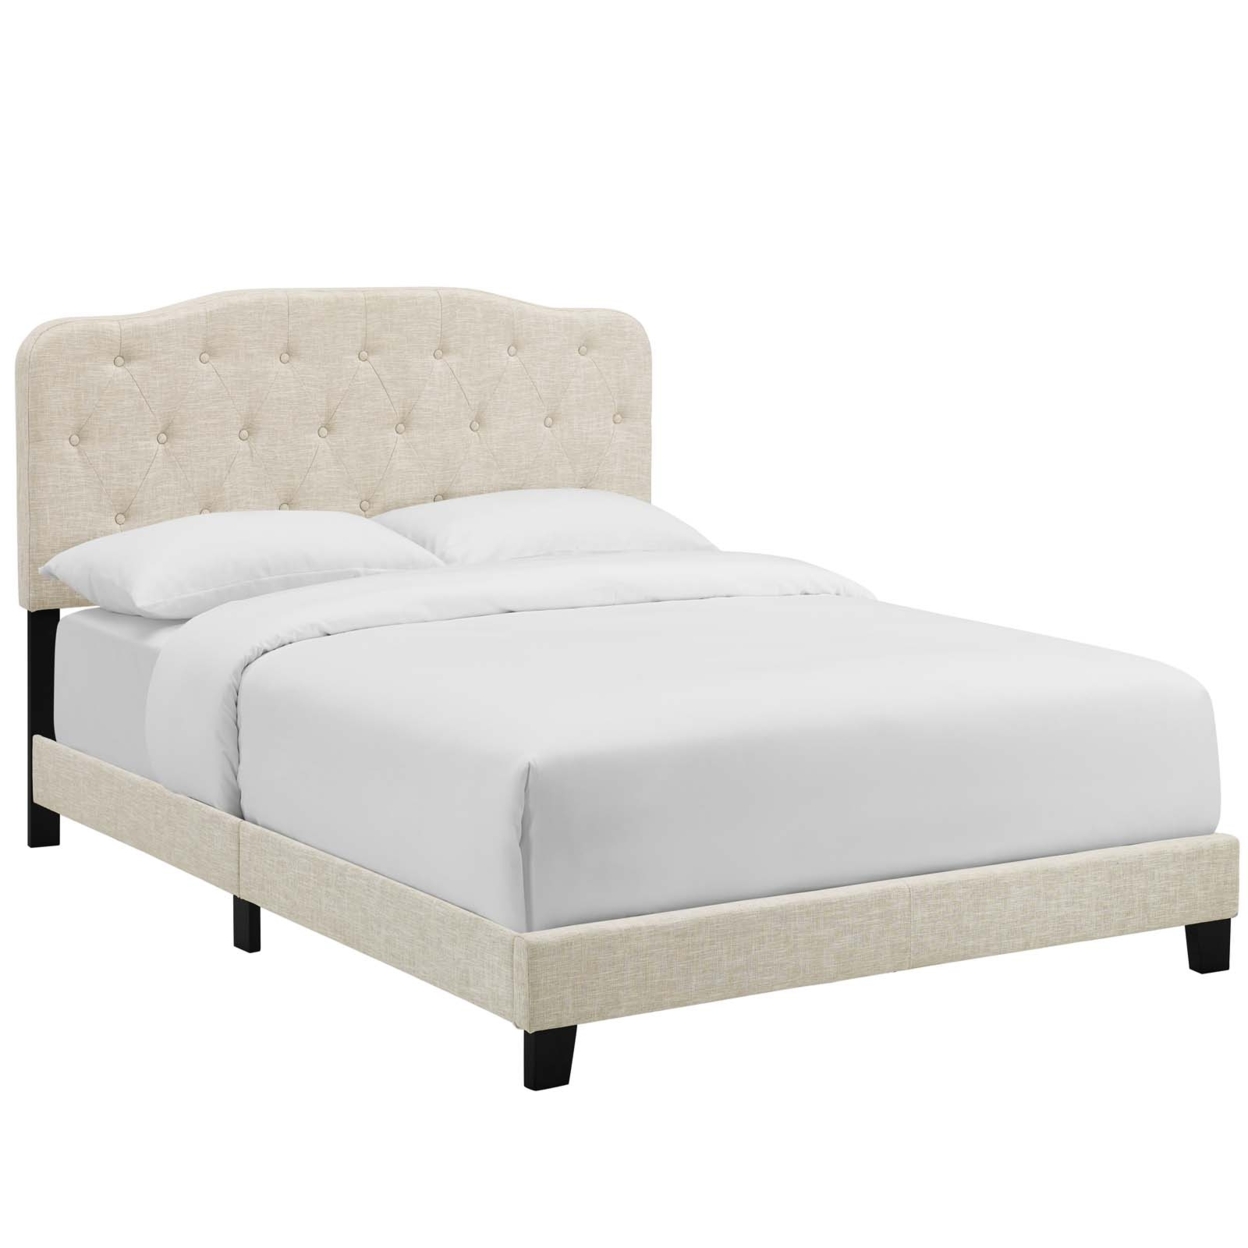 Amelia King Upholstered Fabric Bed, Beige